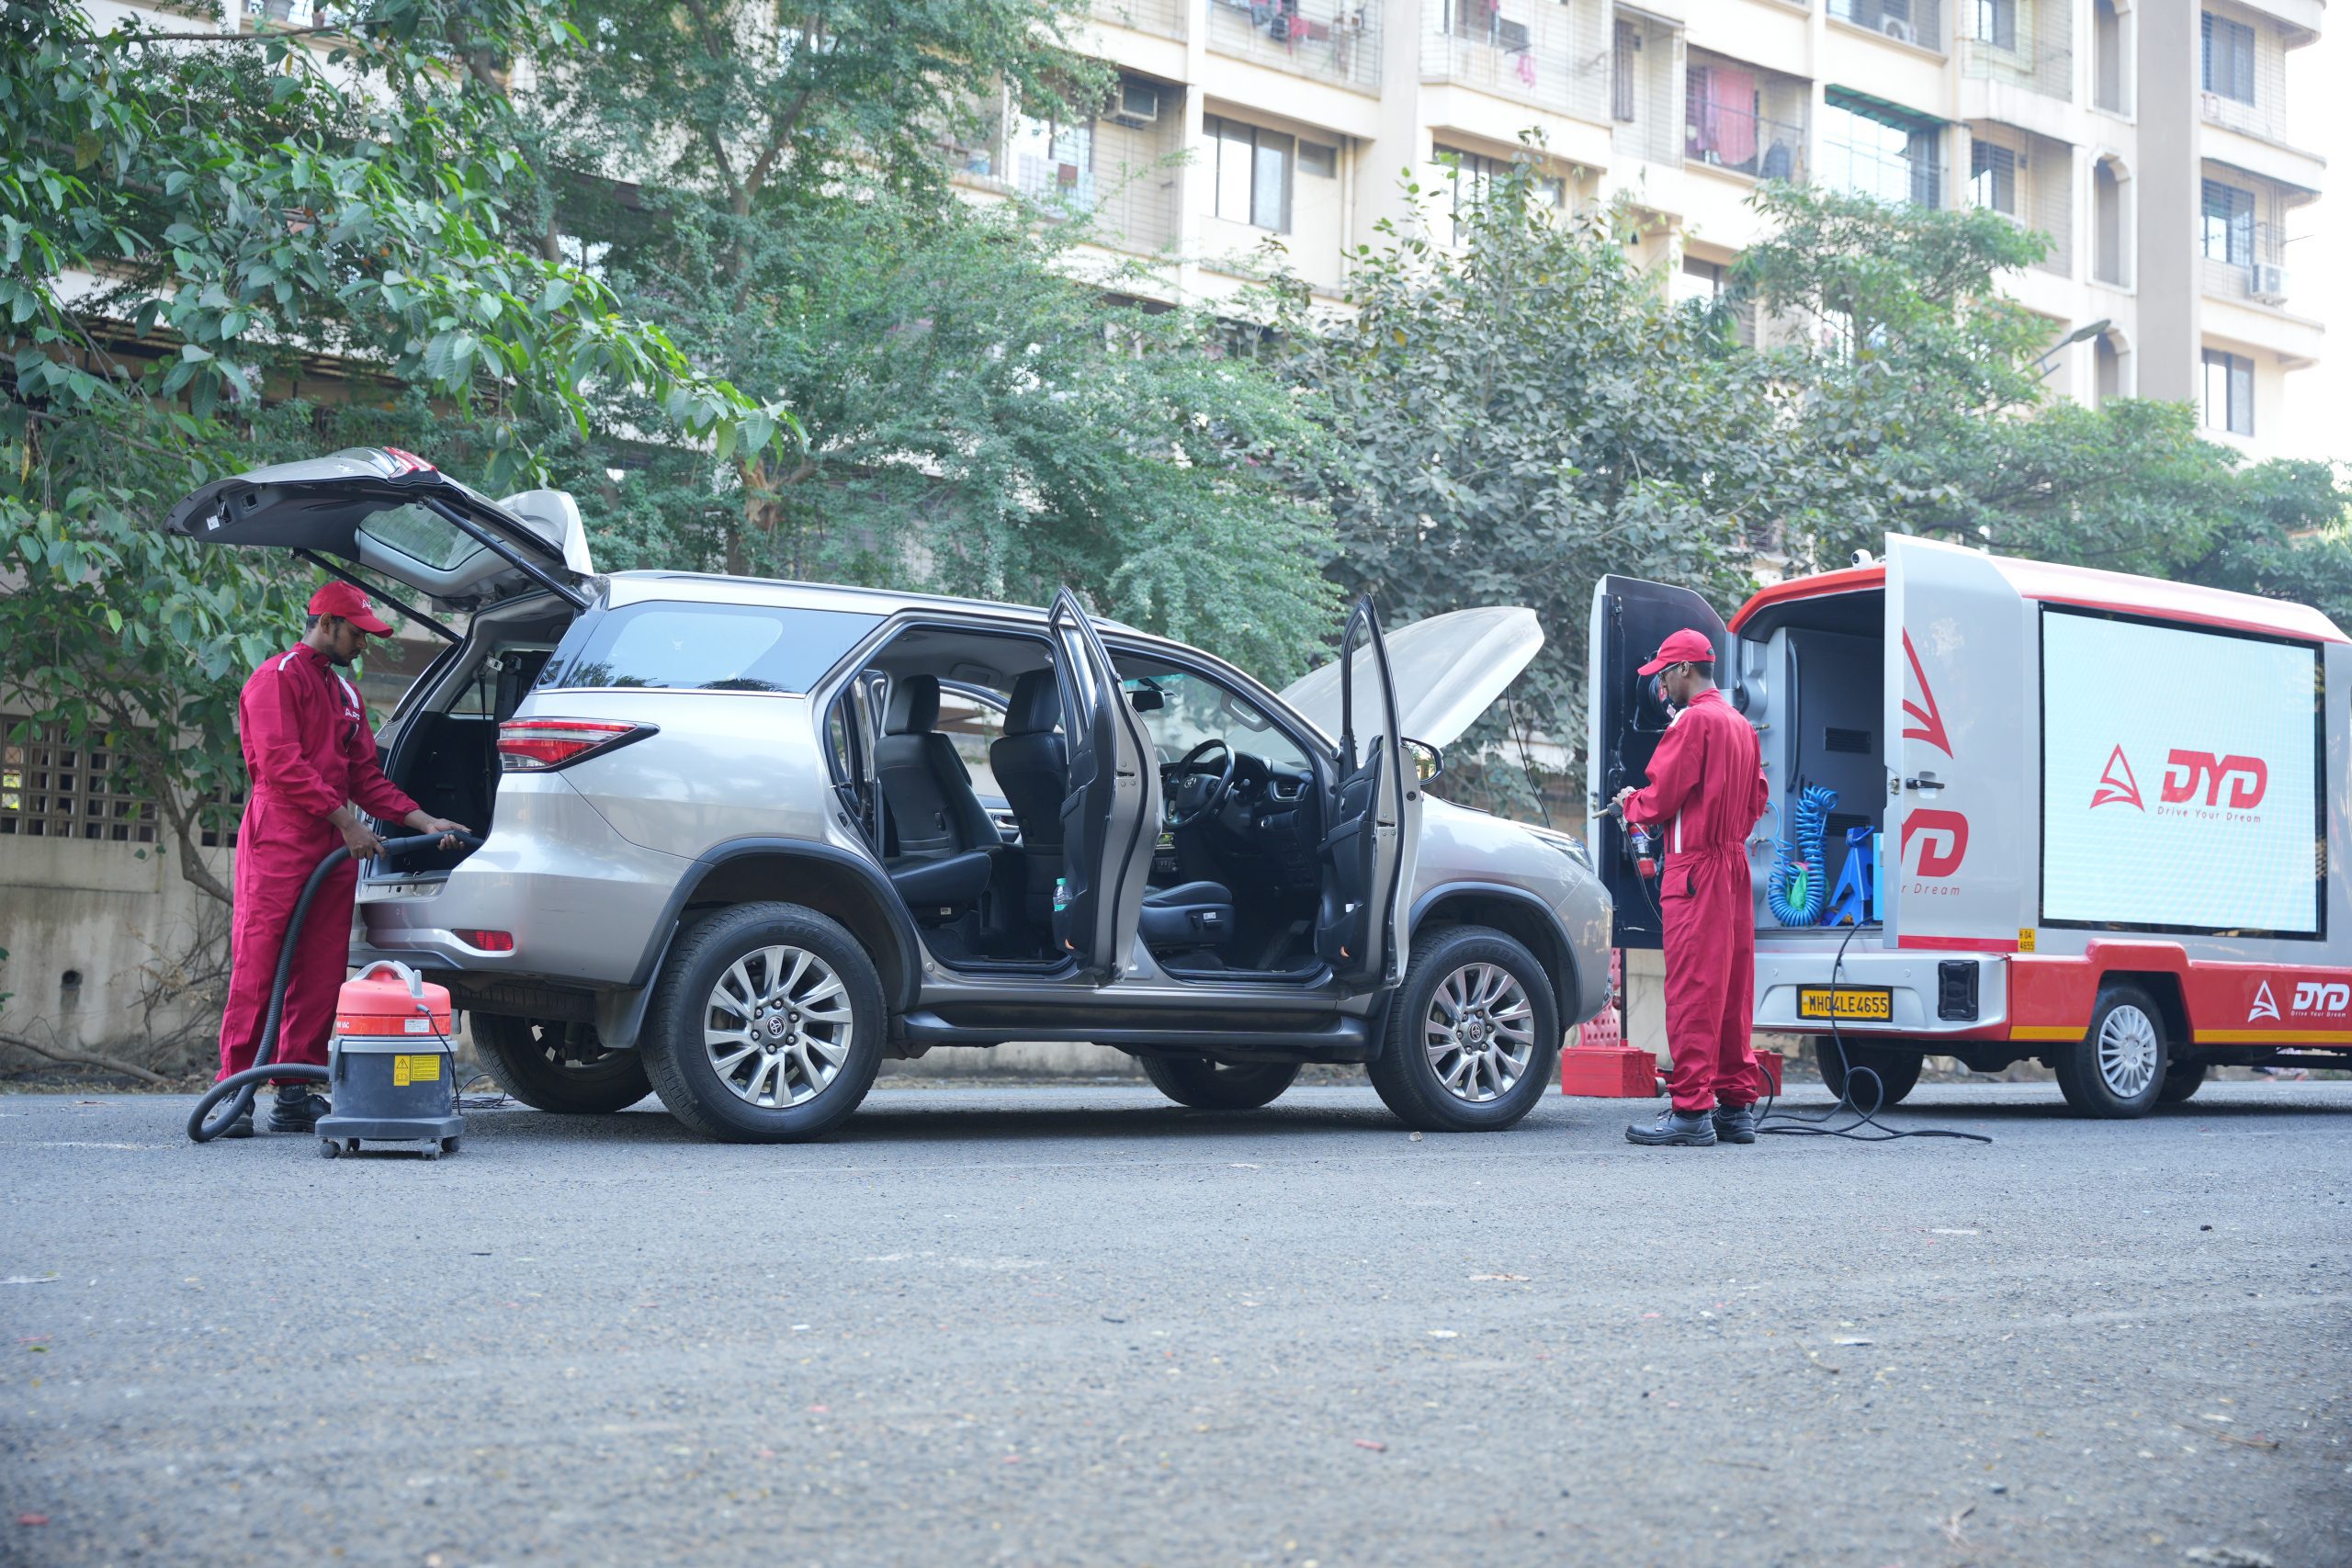 21 Service Checkpoints in just 60 Minutes: New-Age Car Servicing